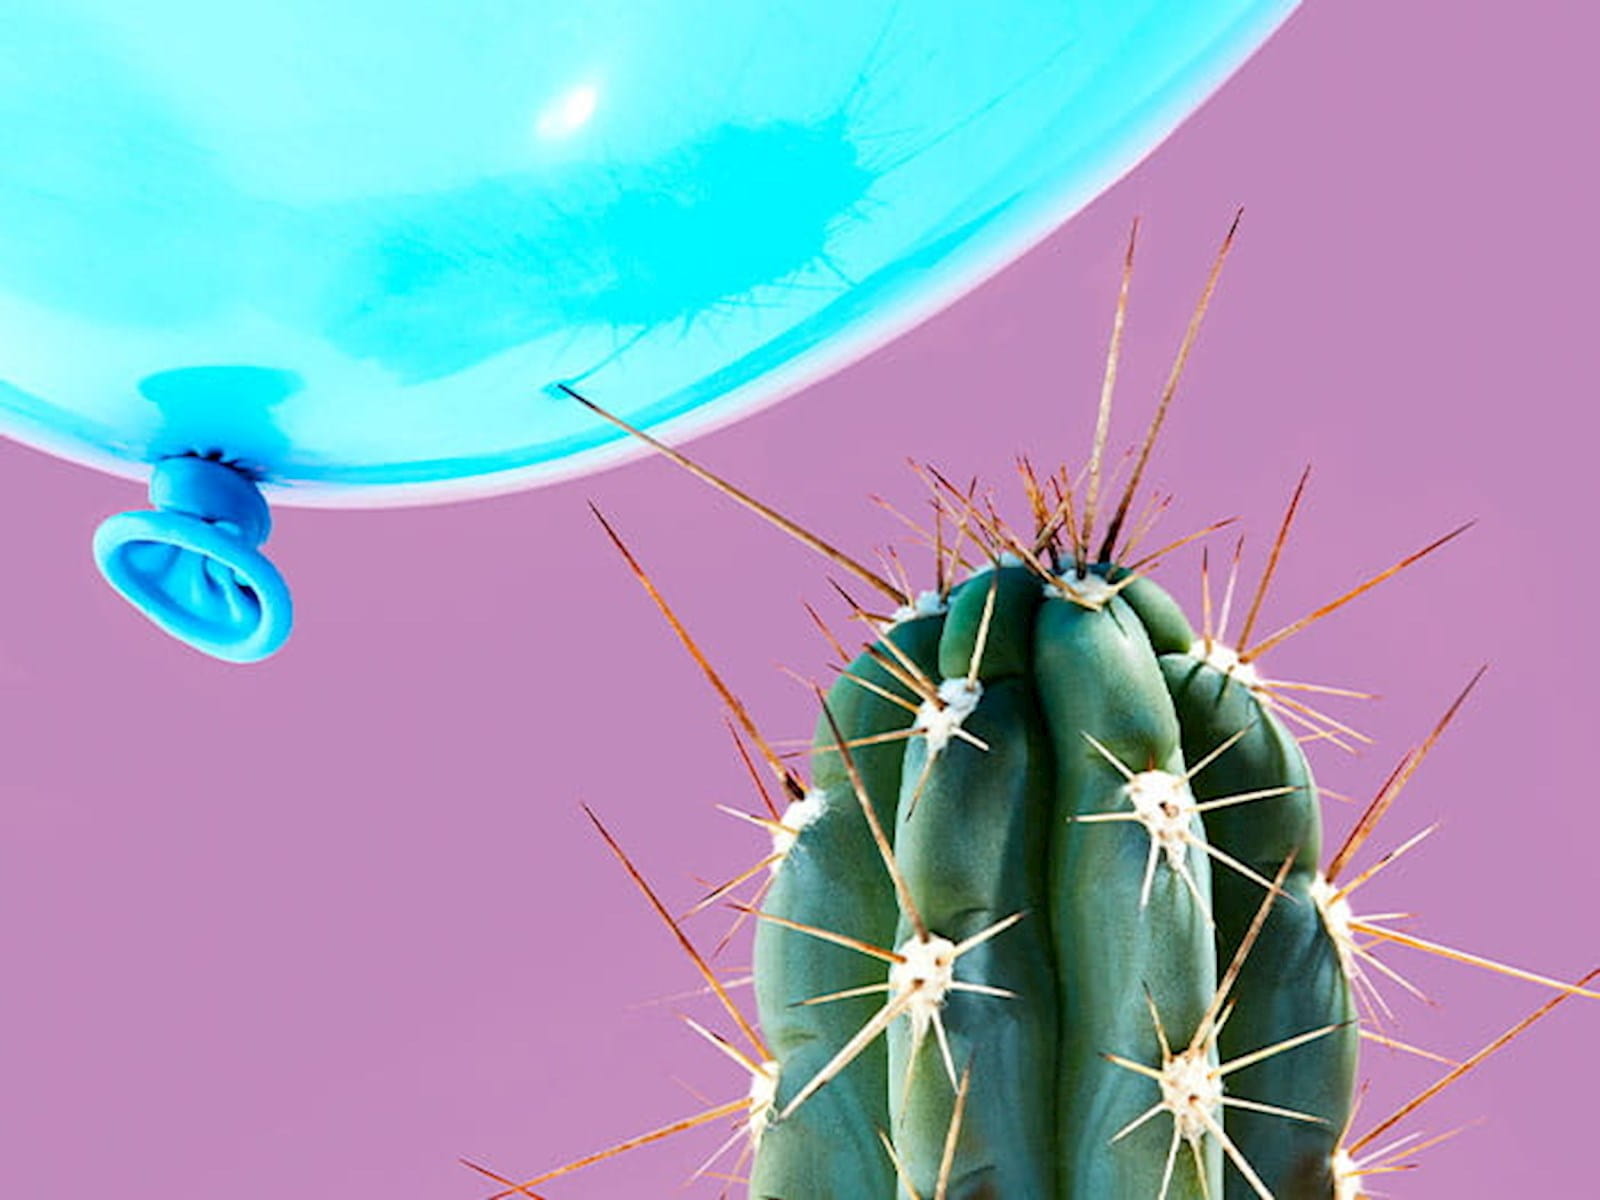 cactus needles poking a bright blue balloon about to burst purple background